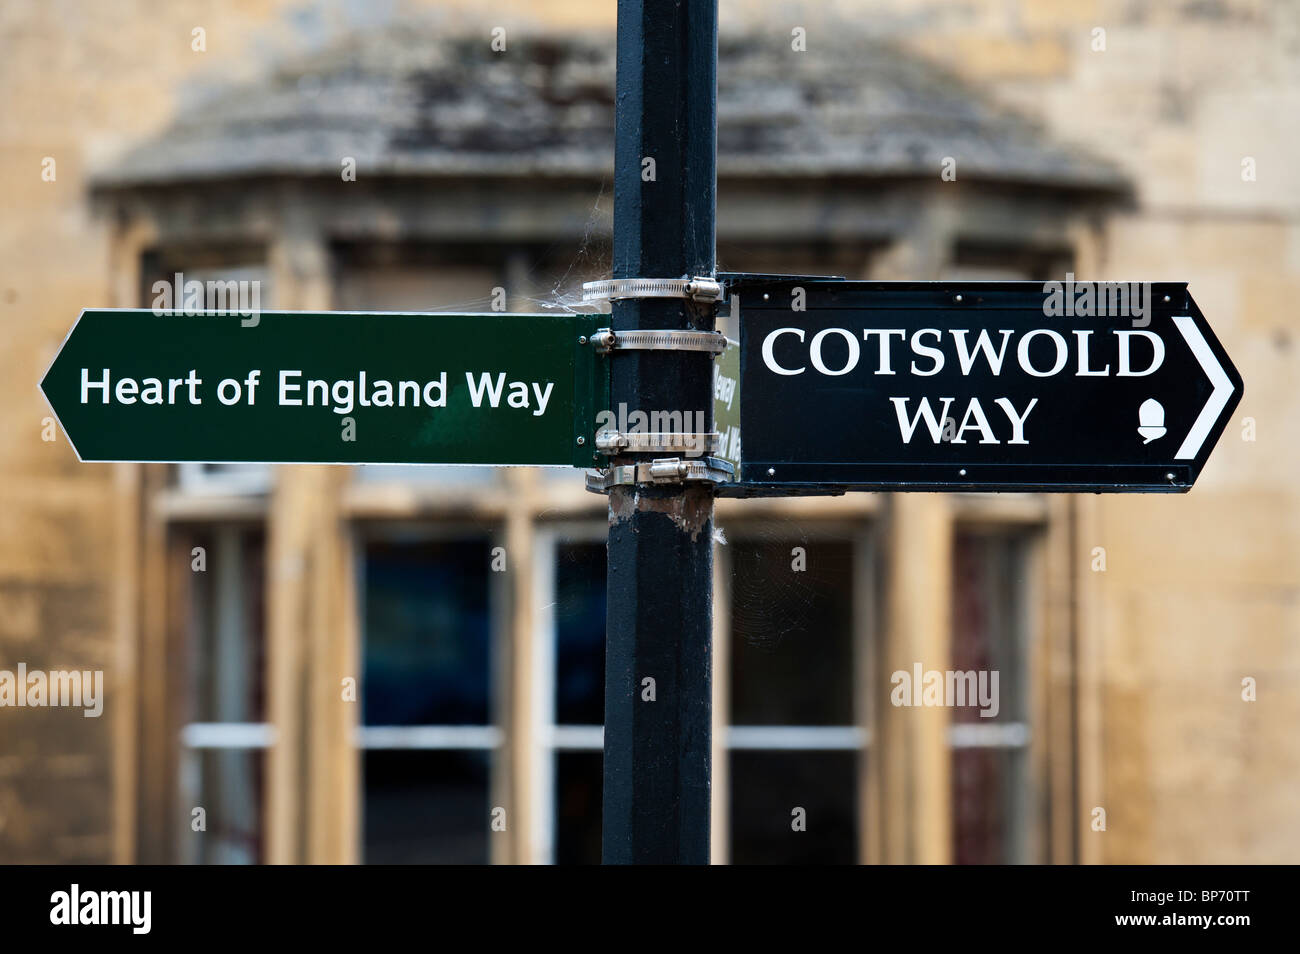 Heart of england way and Cotswold Way sign, Chipping Campden, Cotswolds, England Stock Photo